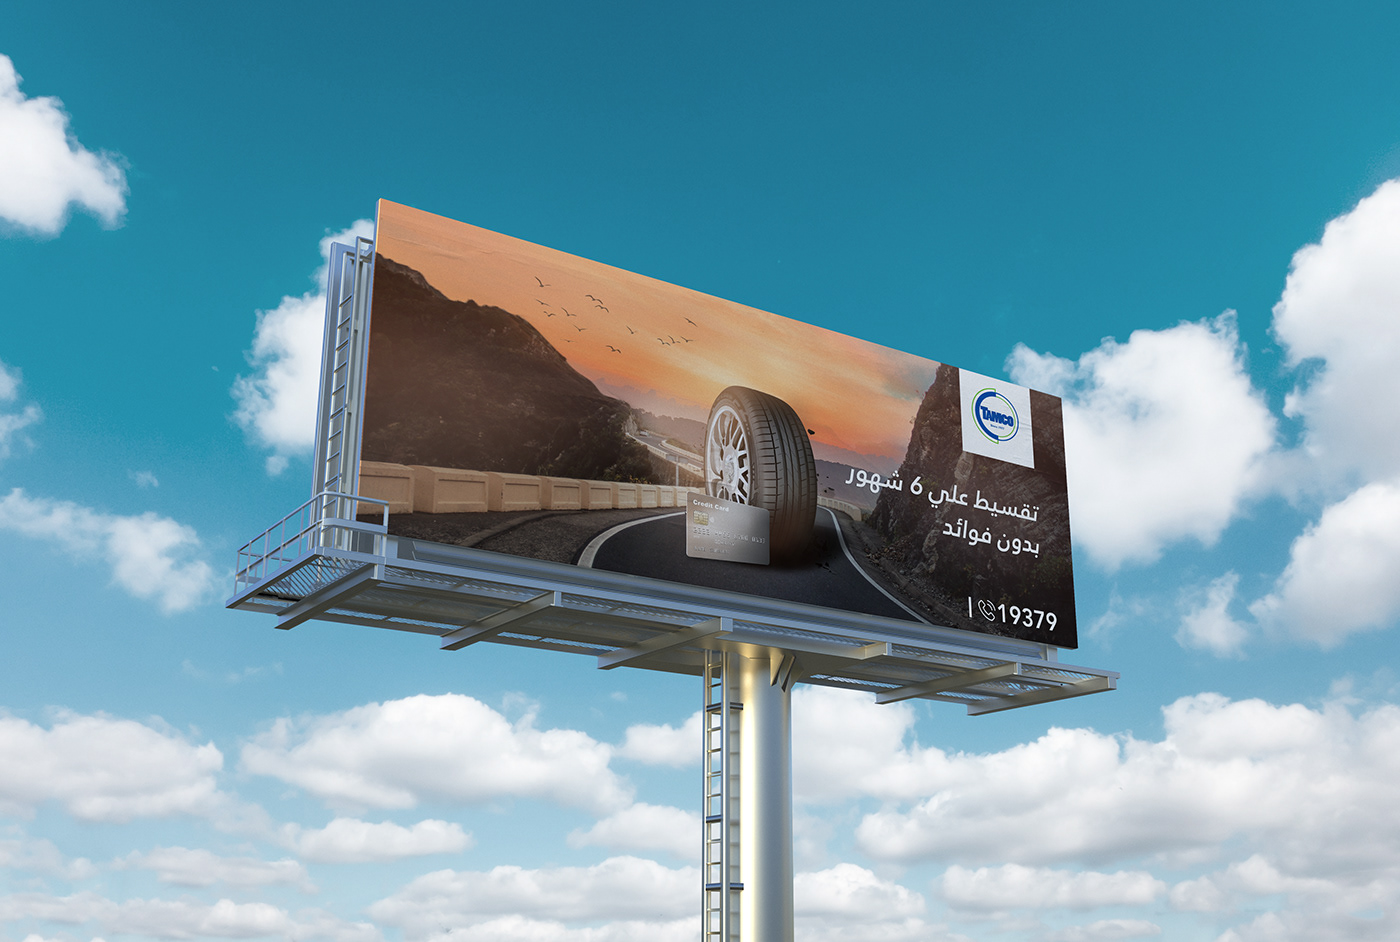 Advertising  agency billboard designs egypt Fivemnkys graphicdesign marketing   TAMCO tires